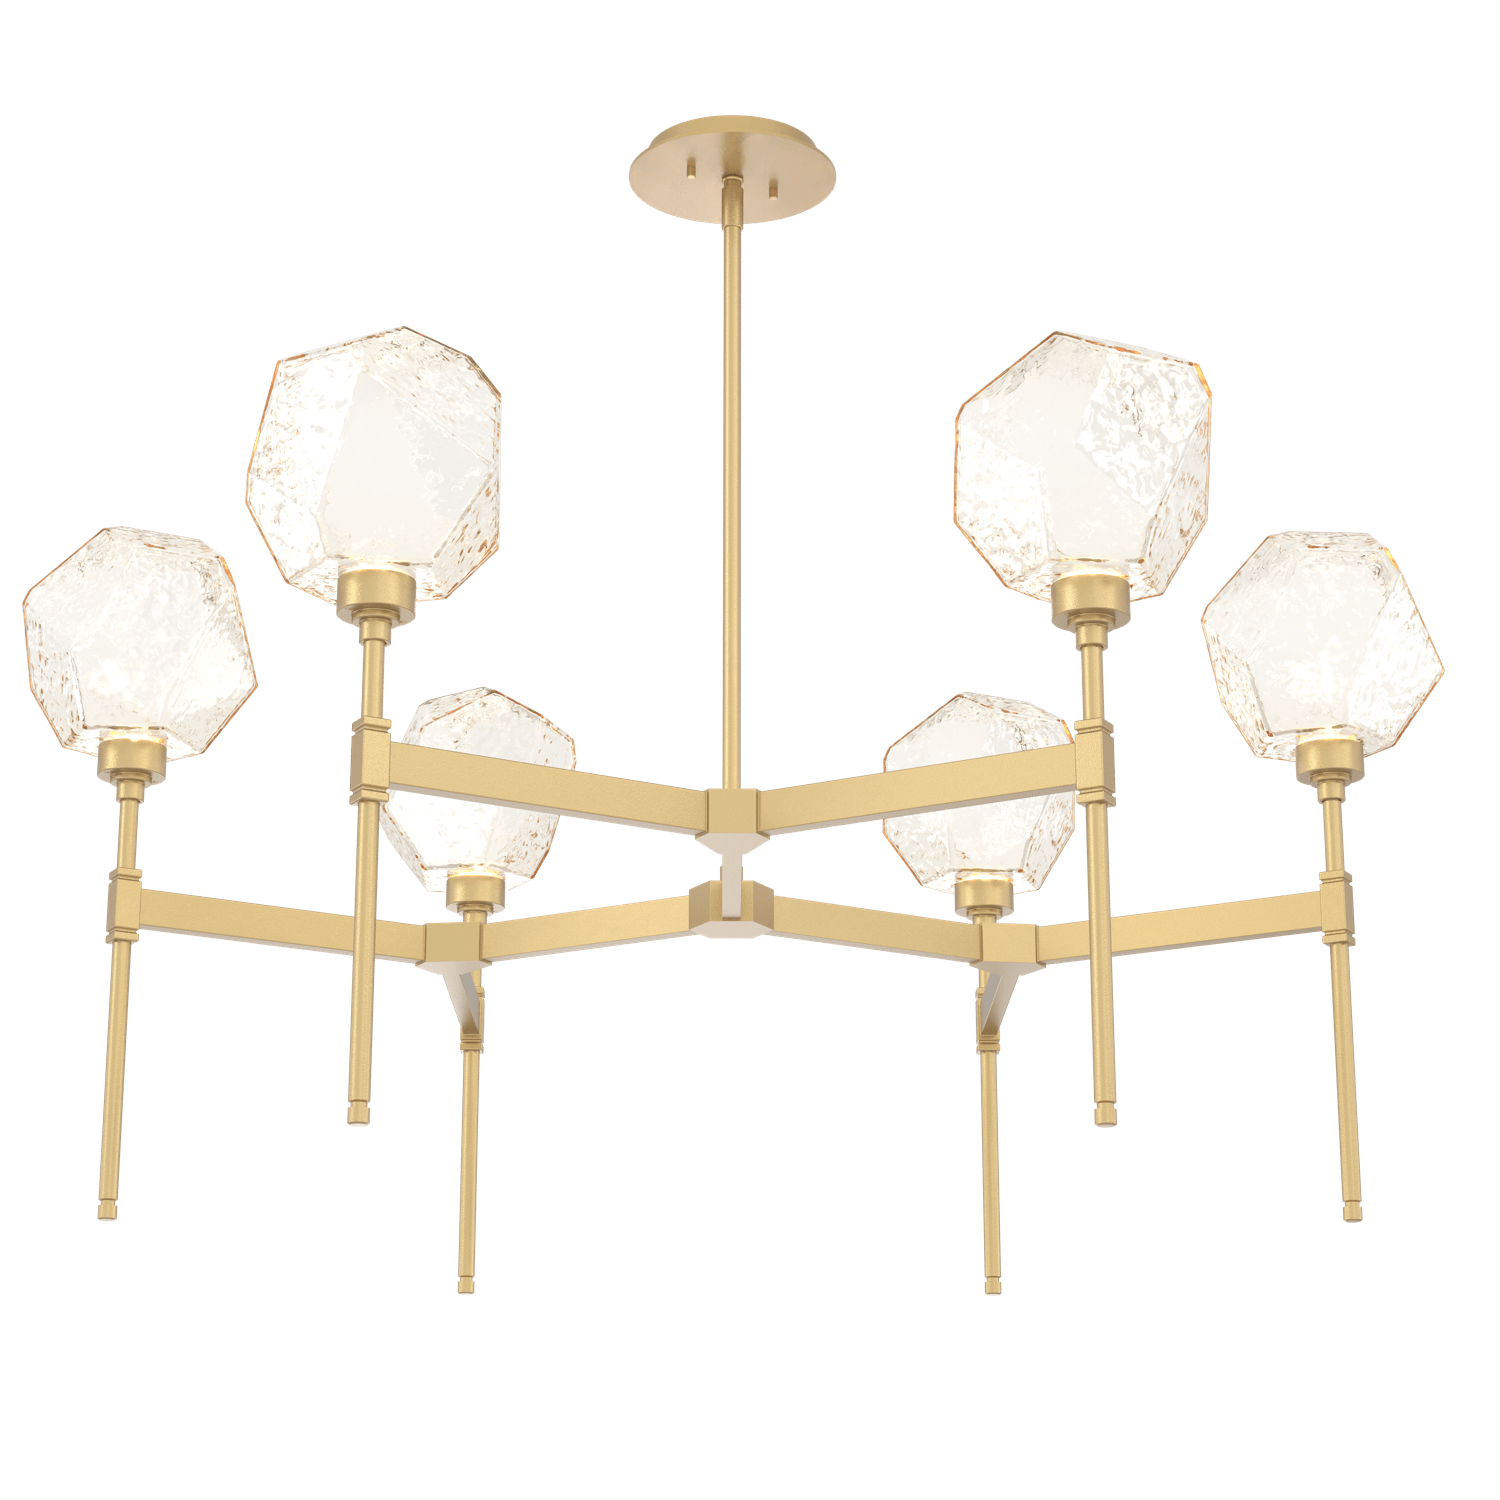 CHB0039-39-GB-A-Hammerton-Studio-Gem-round-belvedere-chandelier-with-gilded-brass-finish-and-amber-blown-glass-shades-and-LED-lamping